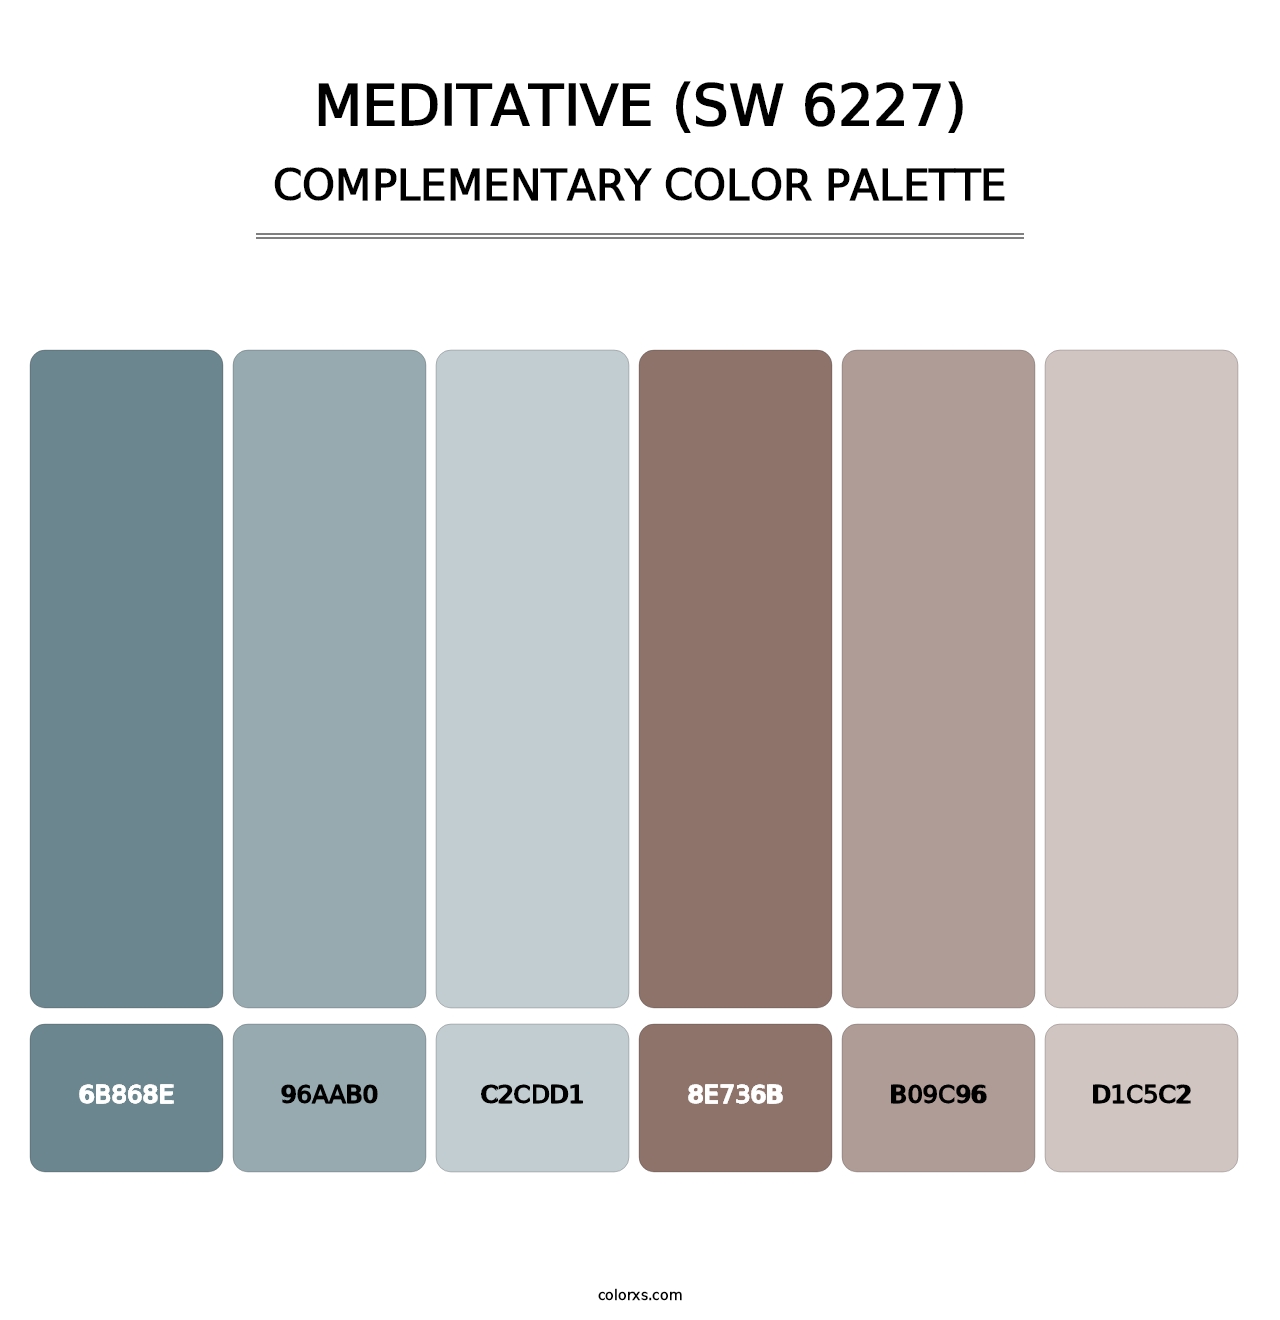 Meditative (SW 6227) - Complementary Color Palette